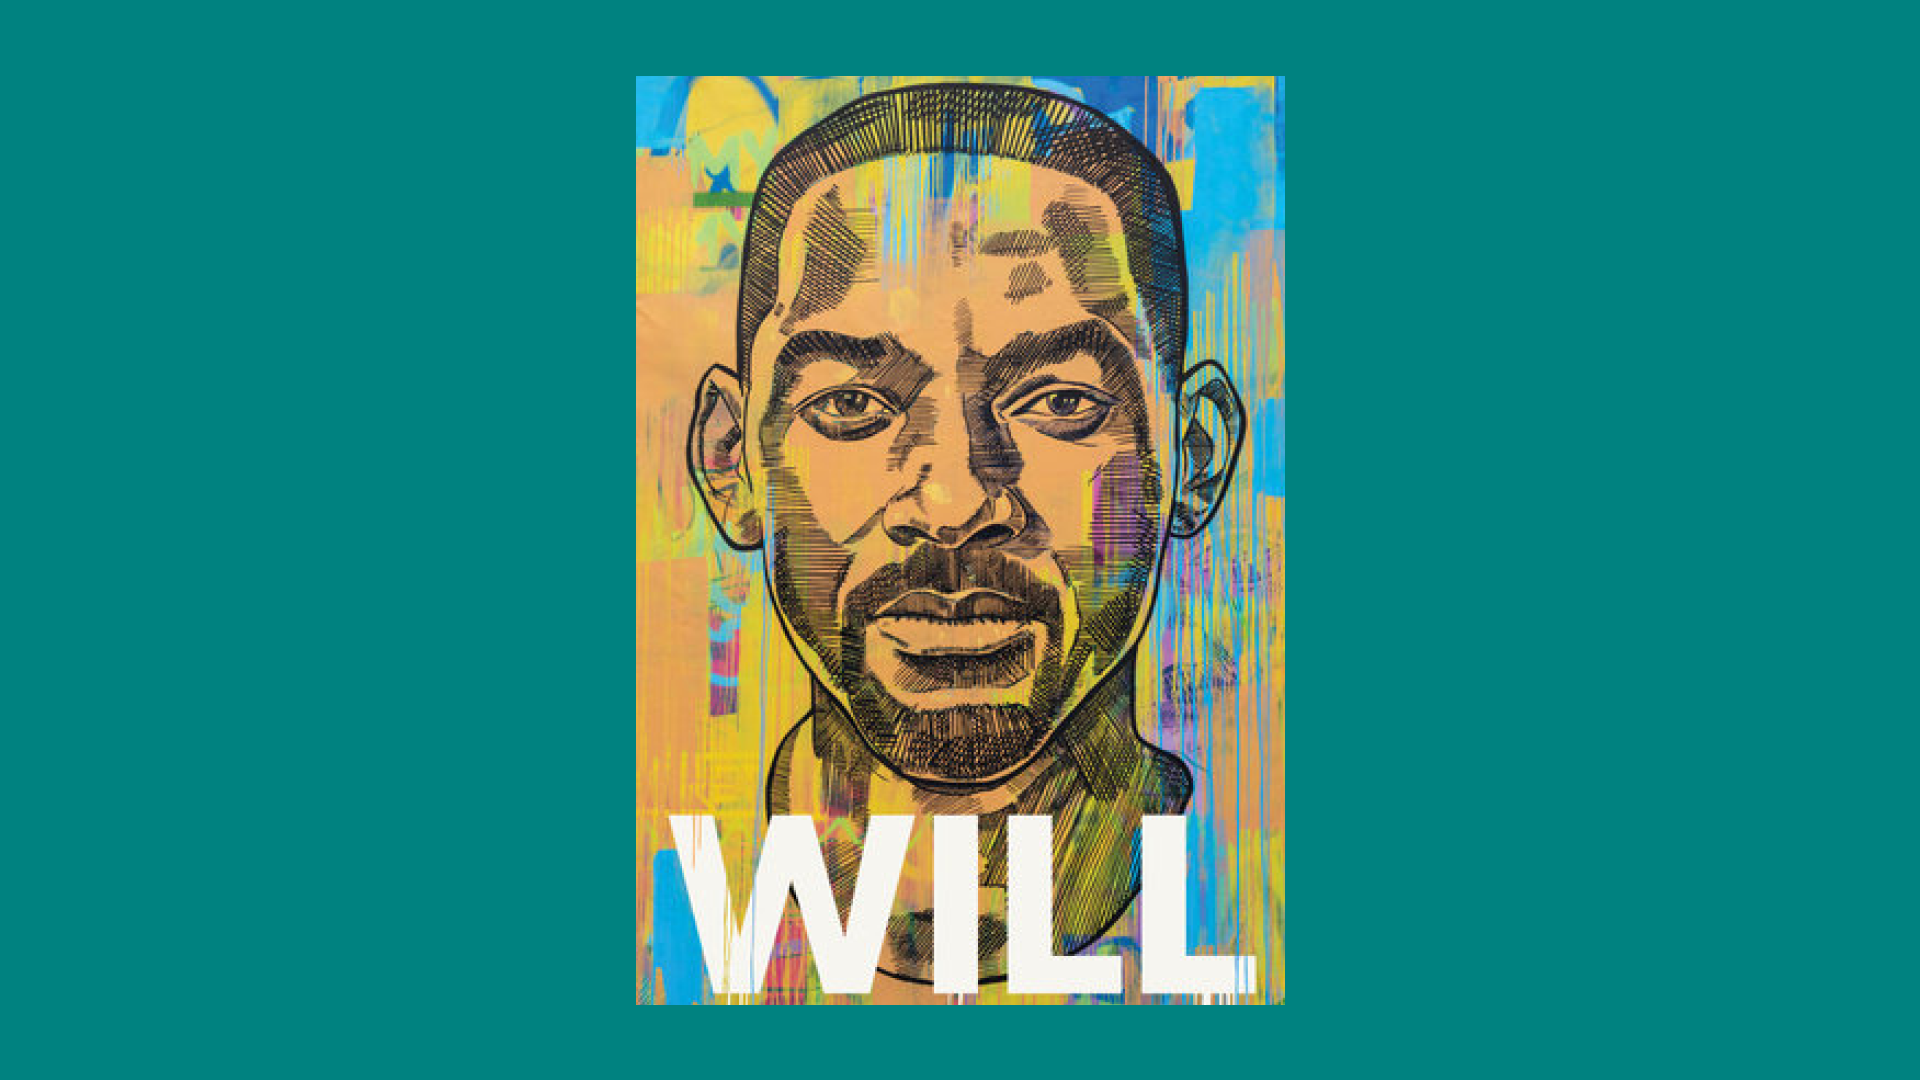 “Will” by Will Smith with Mark Manson